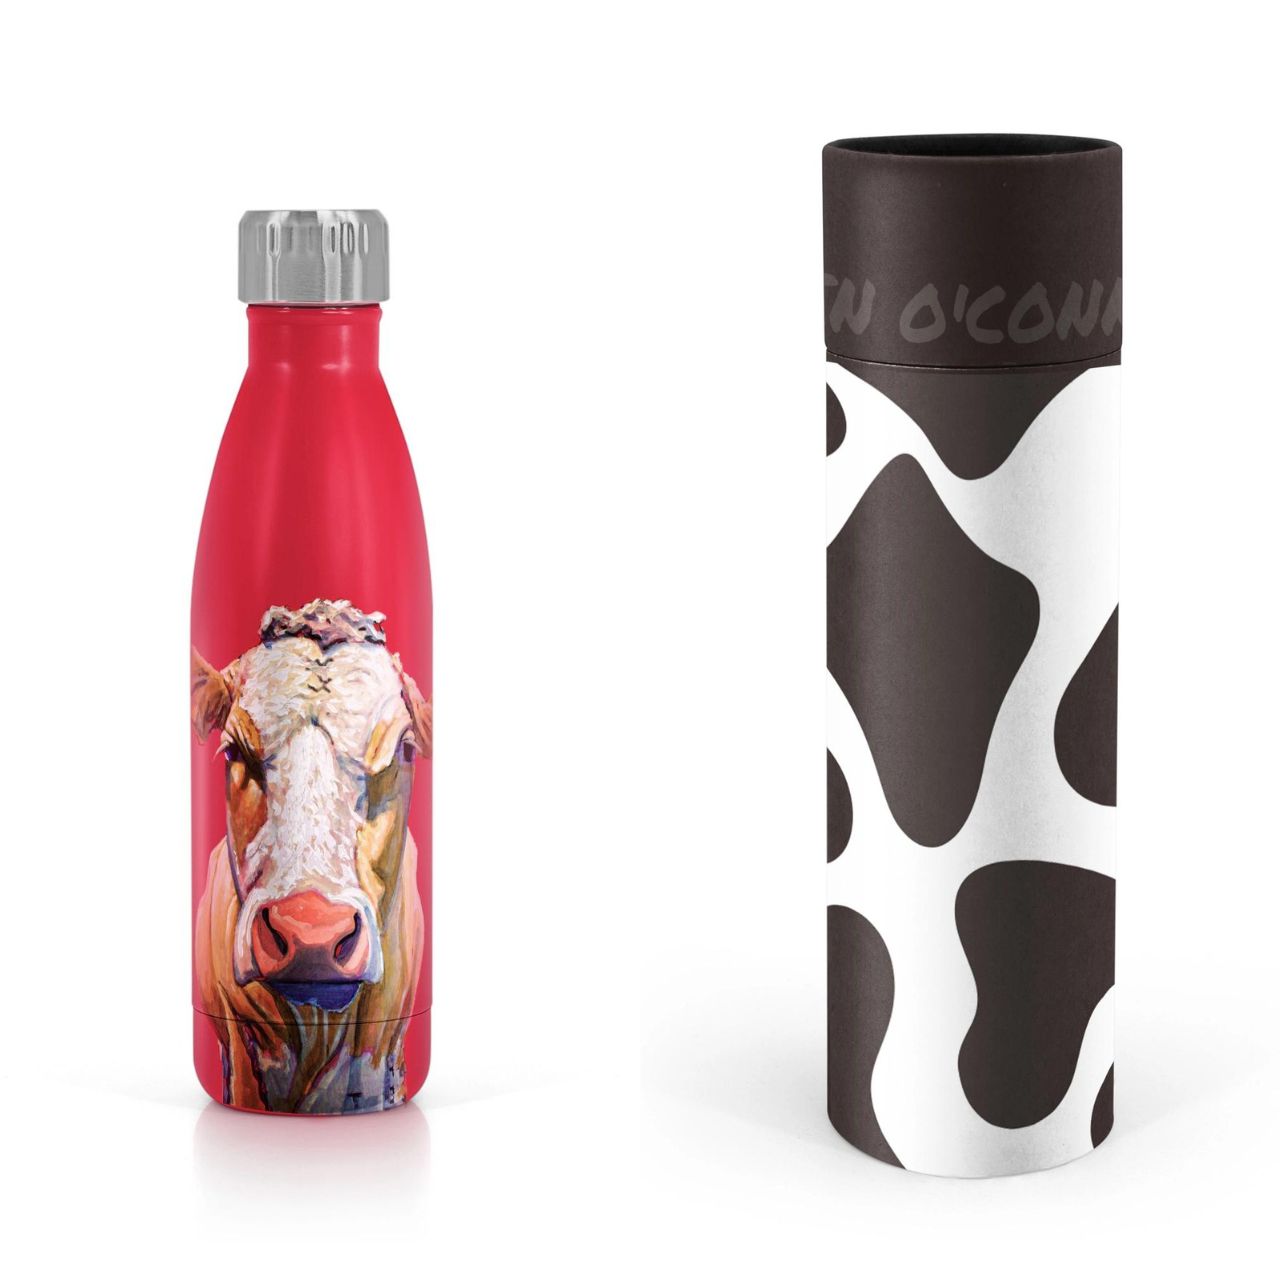 Eoin O'Connor Metal Water Bottle - Pull the Udder One NEW